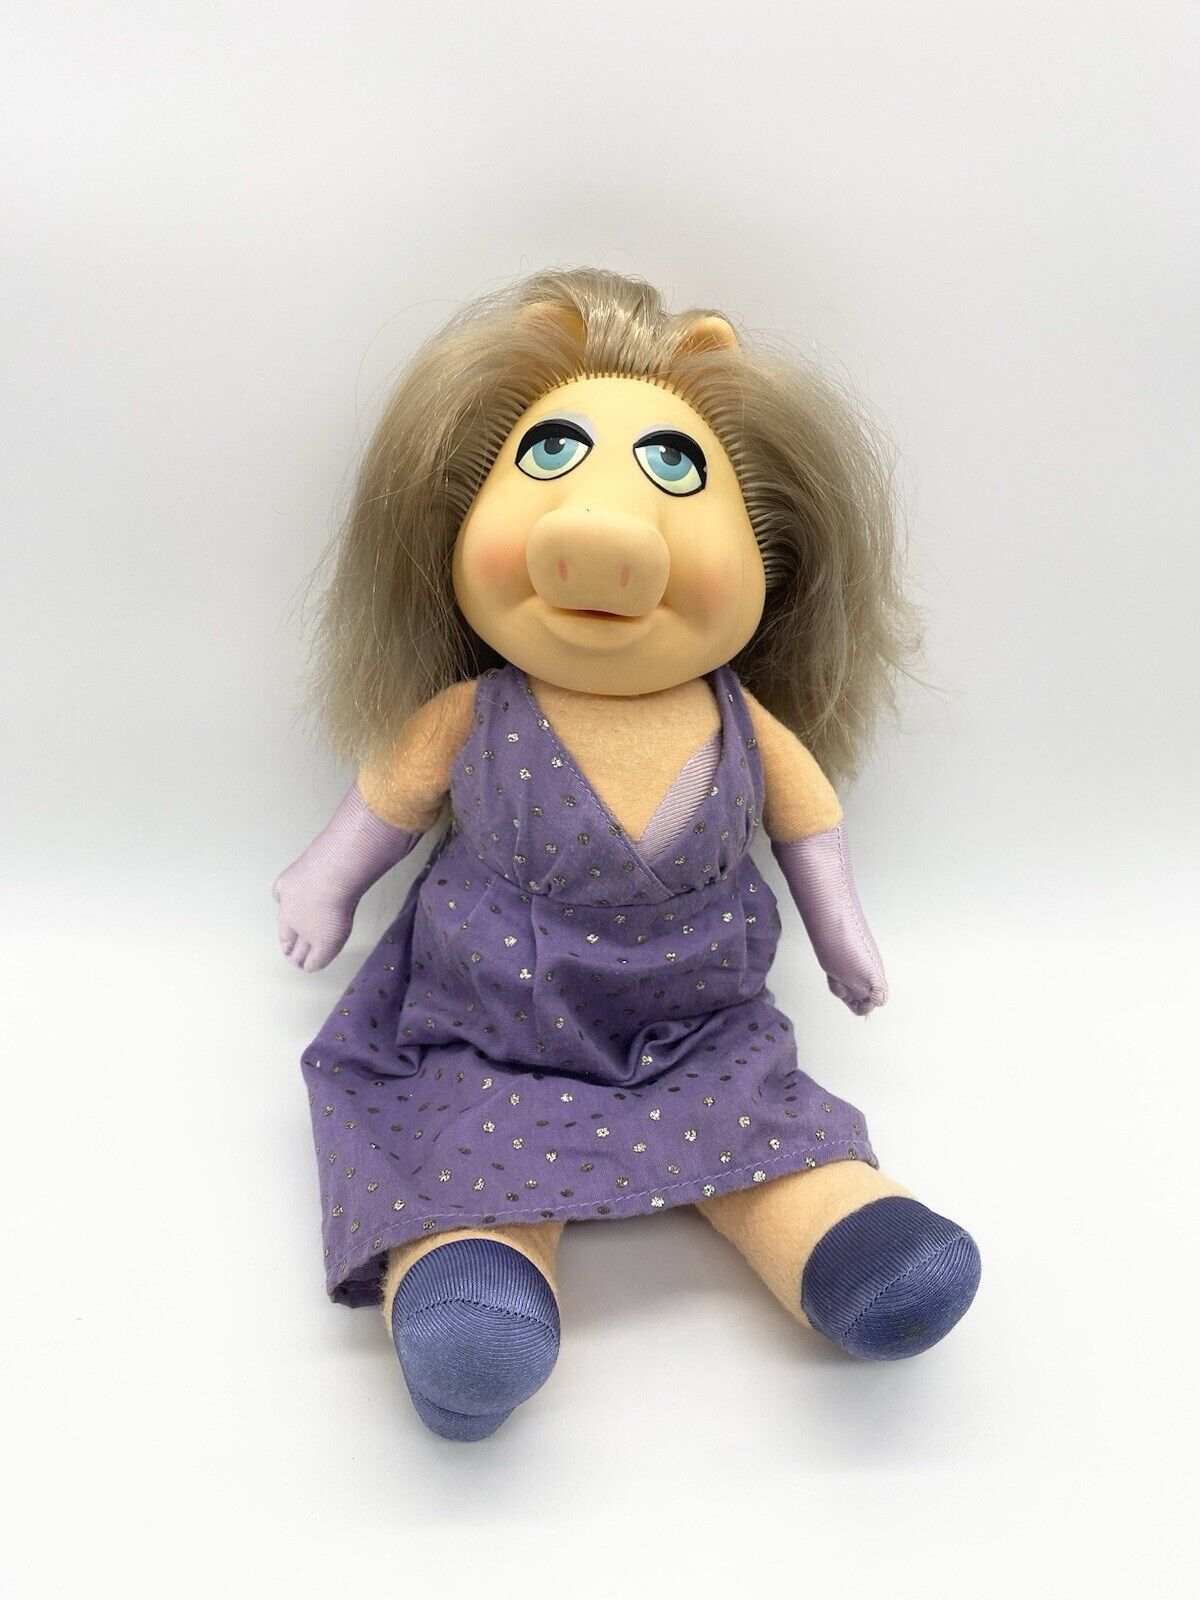 Vintage 1980 Fisher Price Miss Piggy The Muppets Plush Doll Jim Henson READ